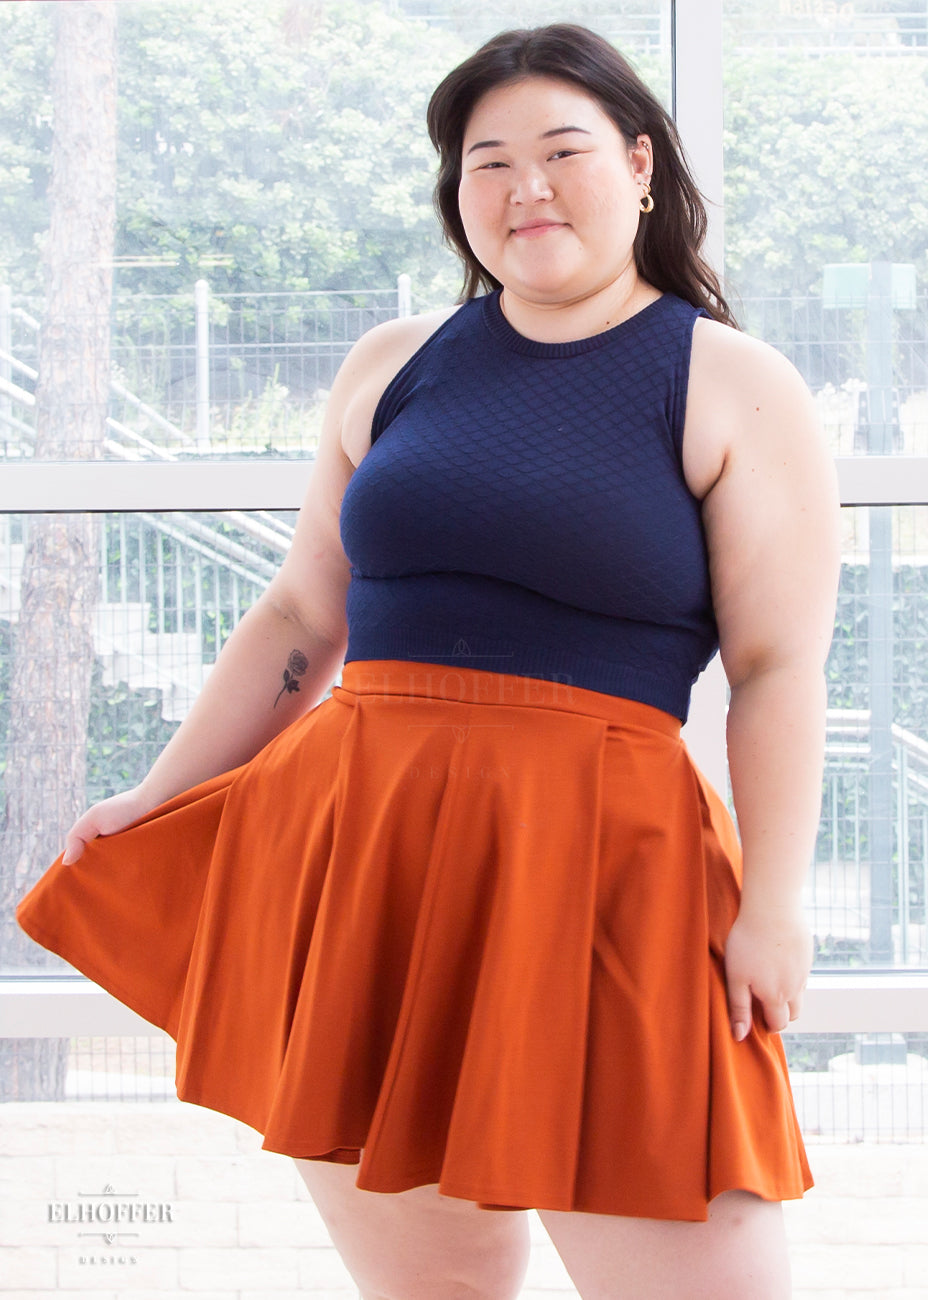 Ashley is modeling the size large skirt. She has a 44” Bust, 39” Waist, 52” Hips, and is 5’7”.